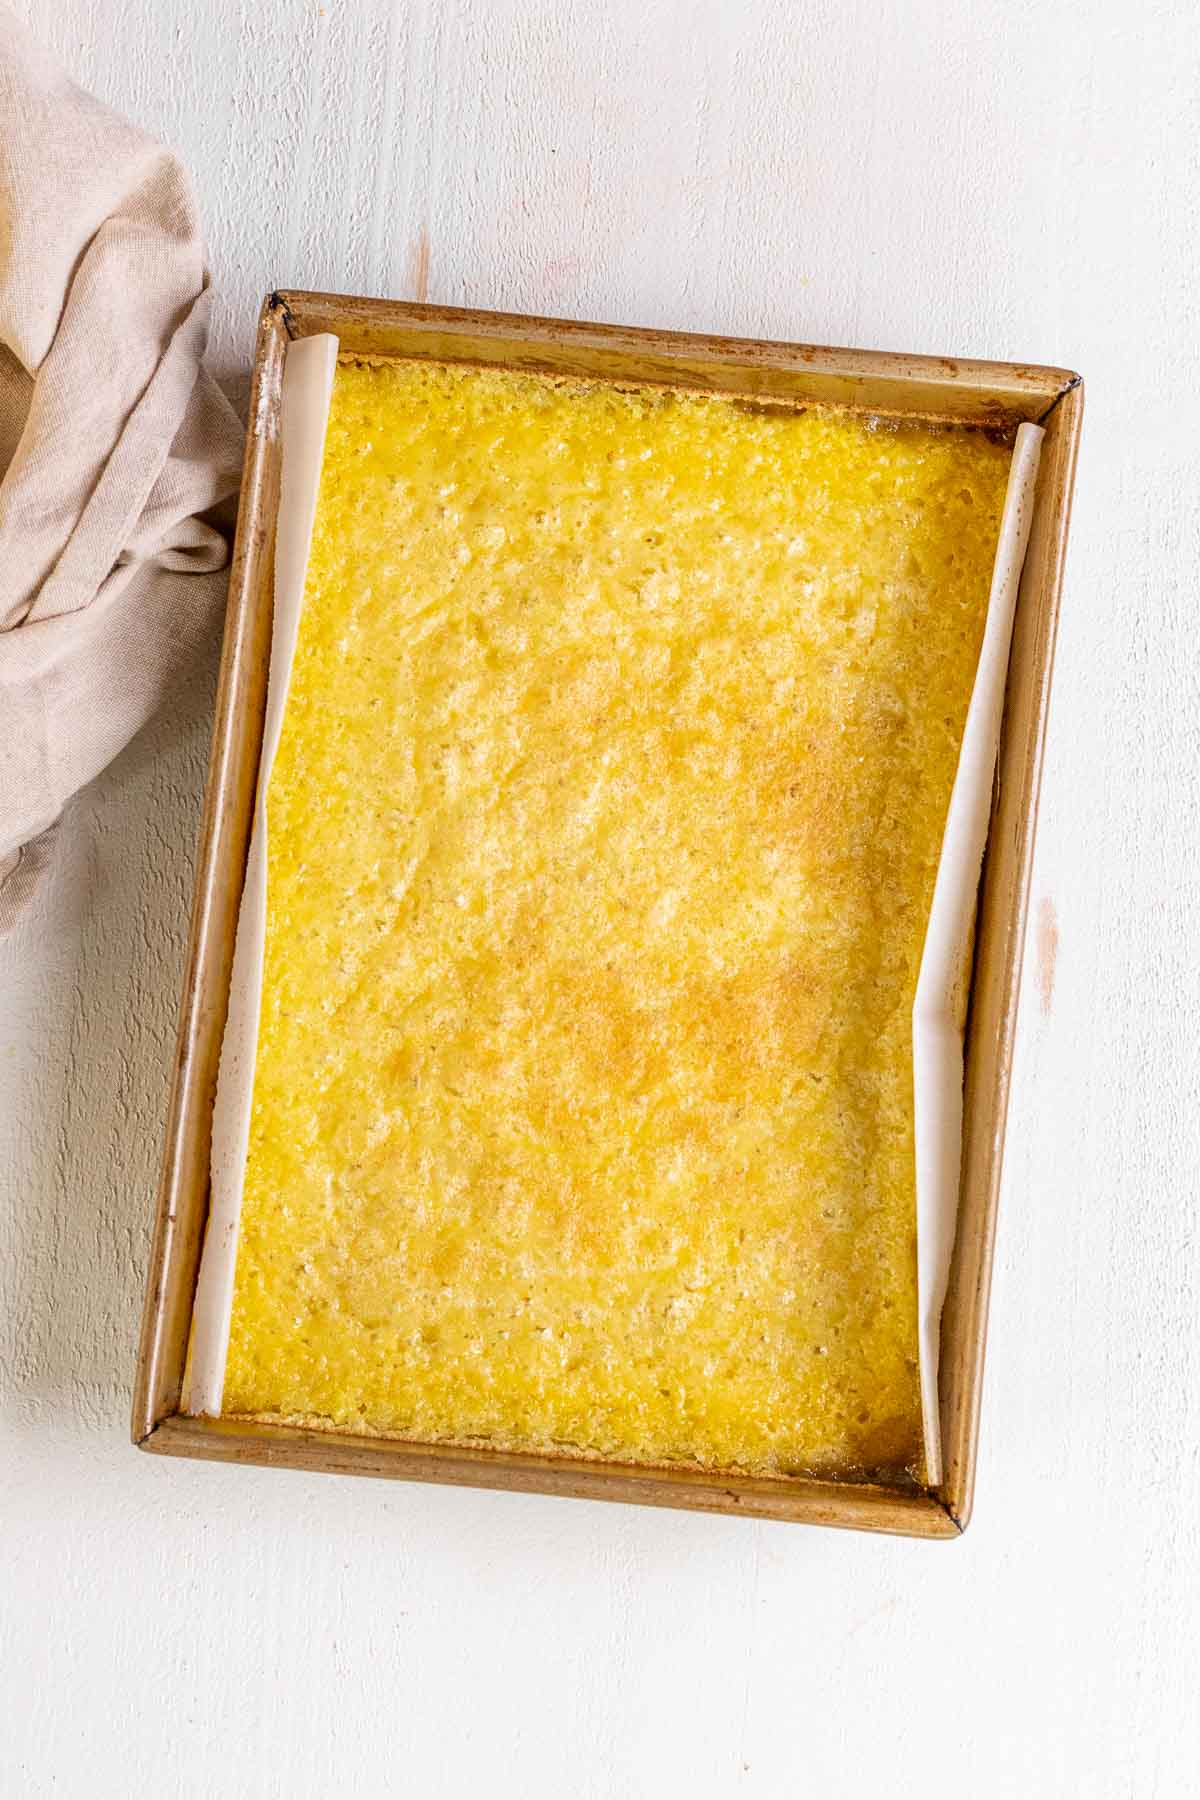 Baked Lemon Shortbread Bars before topping with sour cream mixture